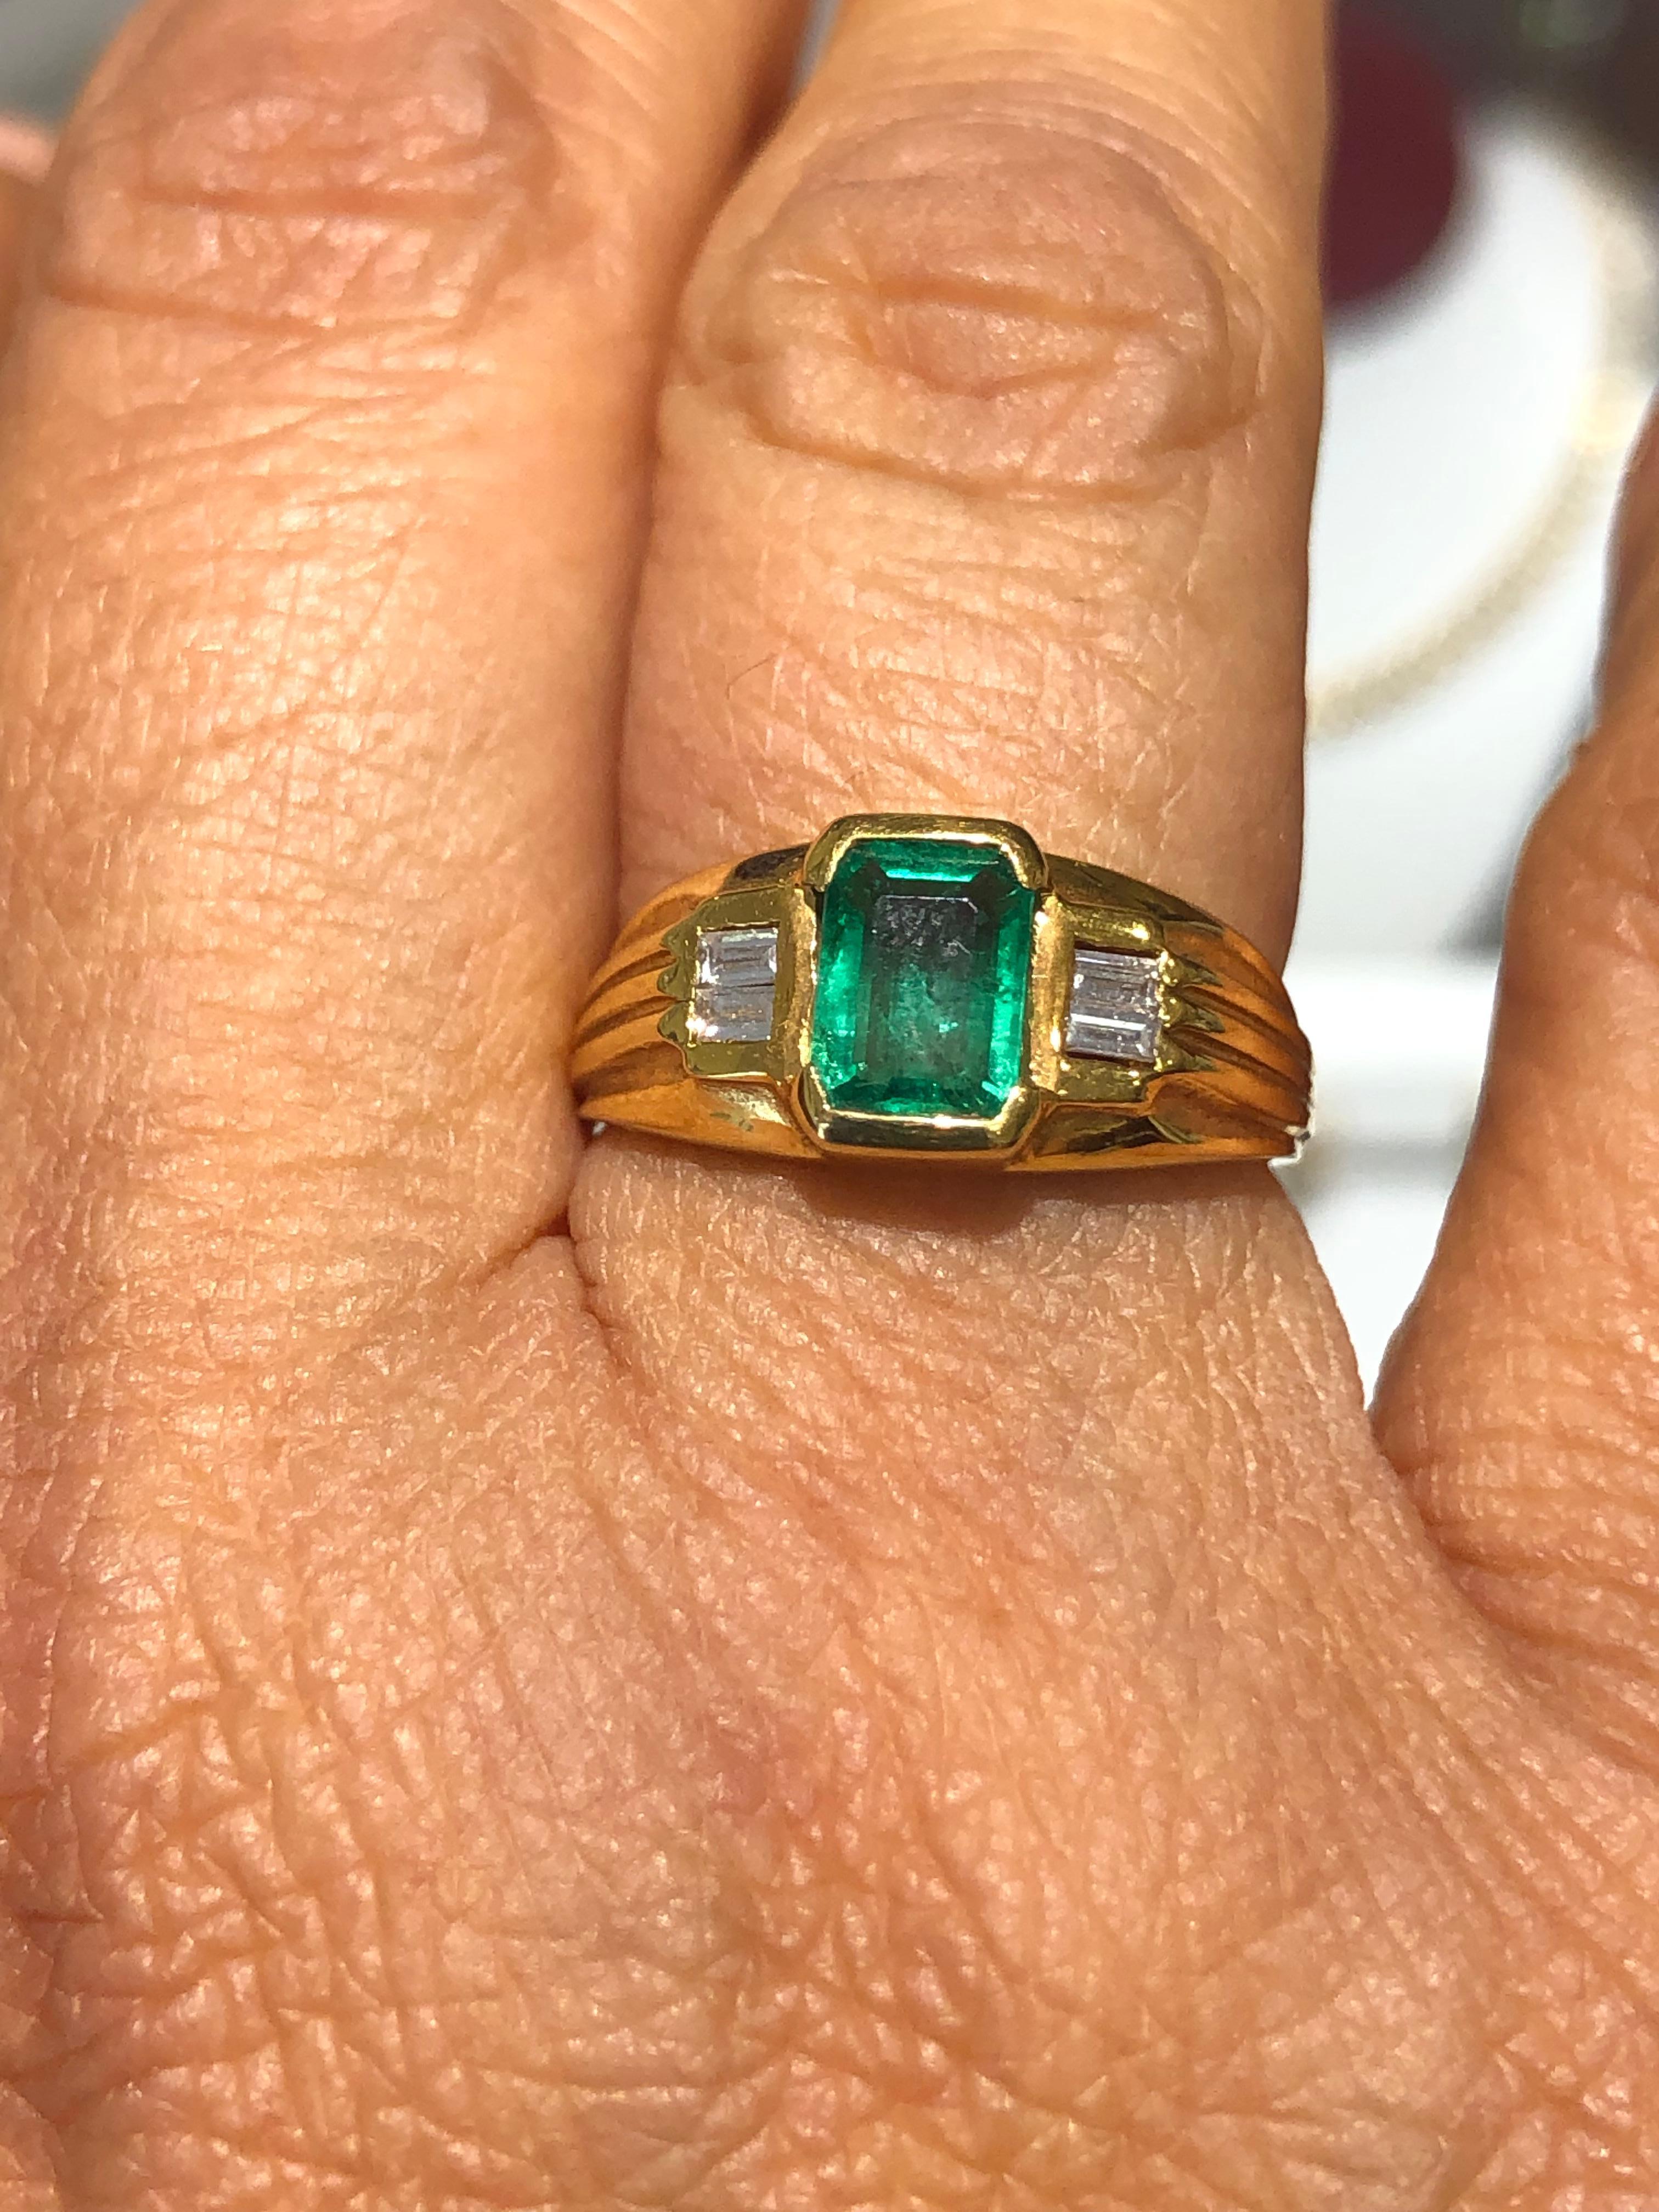 This estate ring displayed is a bluish-green Colombian emerald, solitaire, emerald-cut bezel ring in 18K yellow gold. This gorgeous solitaire ring carries a full 0.80 carat emerald in a bezel setting. The emerald has very good clarity and luster.